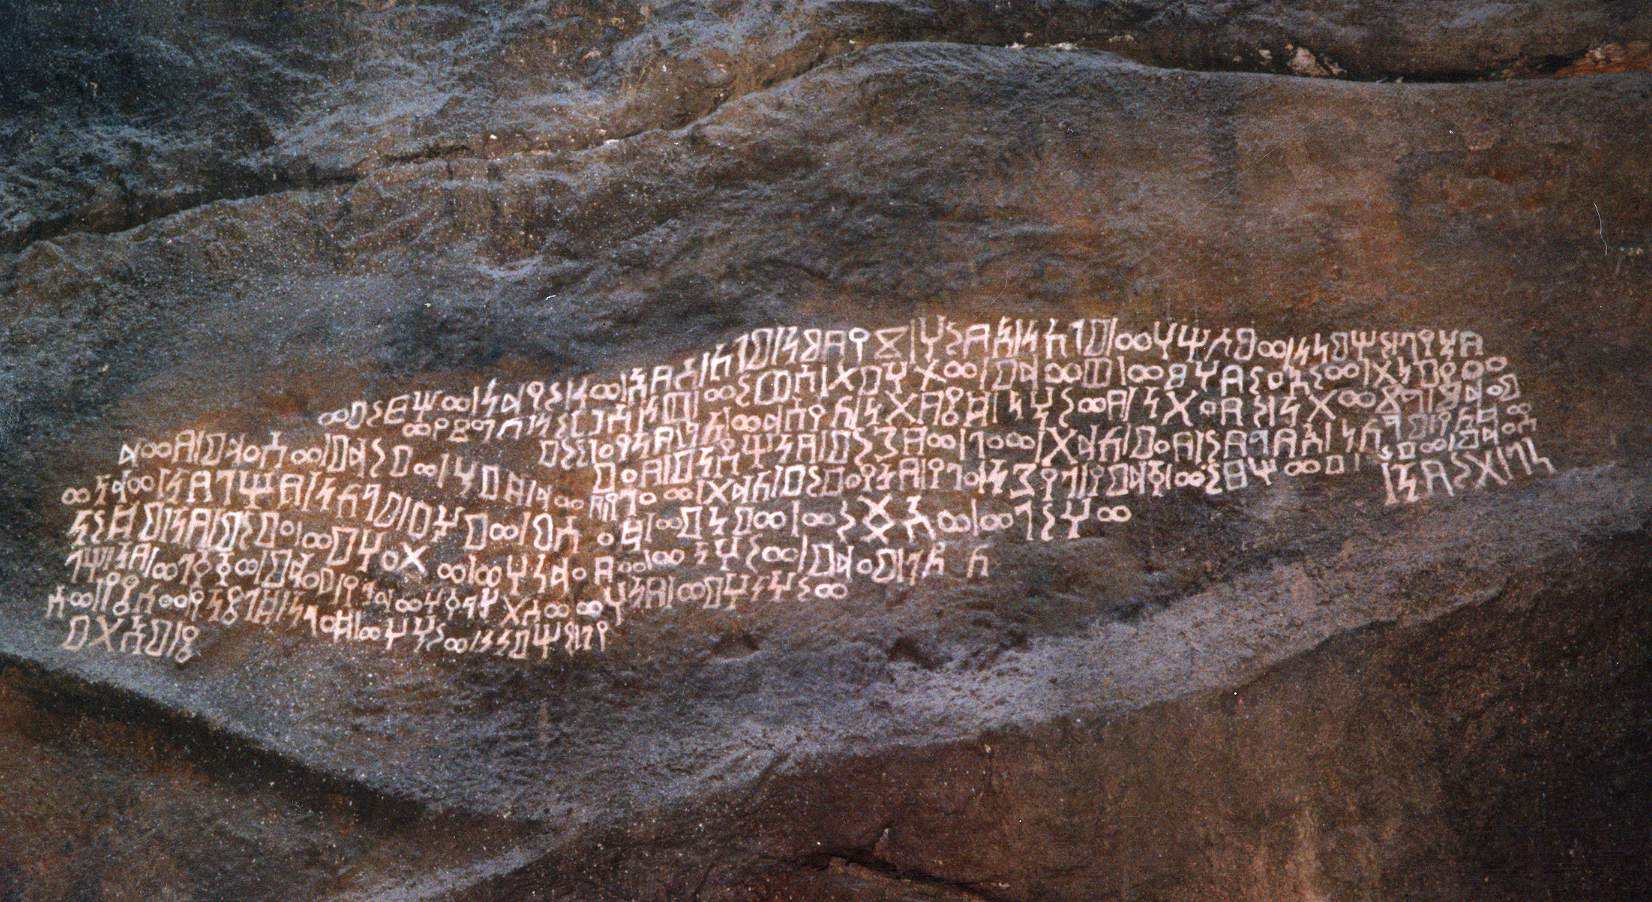 The "inscription of Abraha;" image courtesy of the National Museum of Natural History, Smithsonian Institute, http://www.mnh.si.edu/epigraphy/e_pre-islamic/fig04_sabaean.htm.